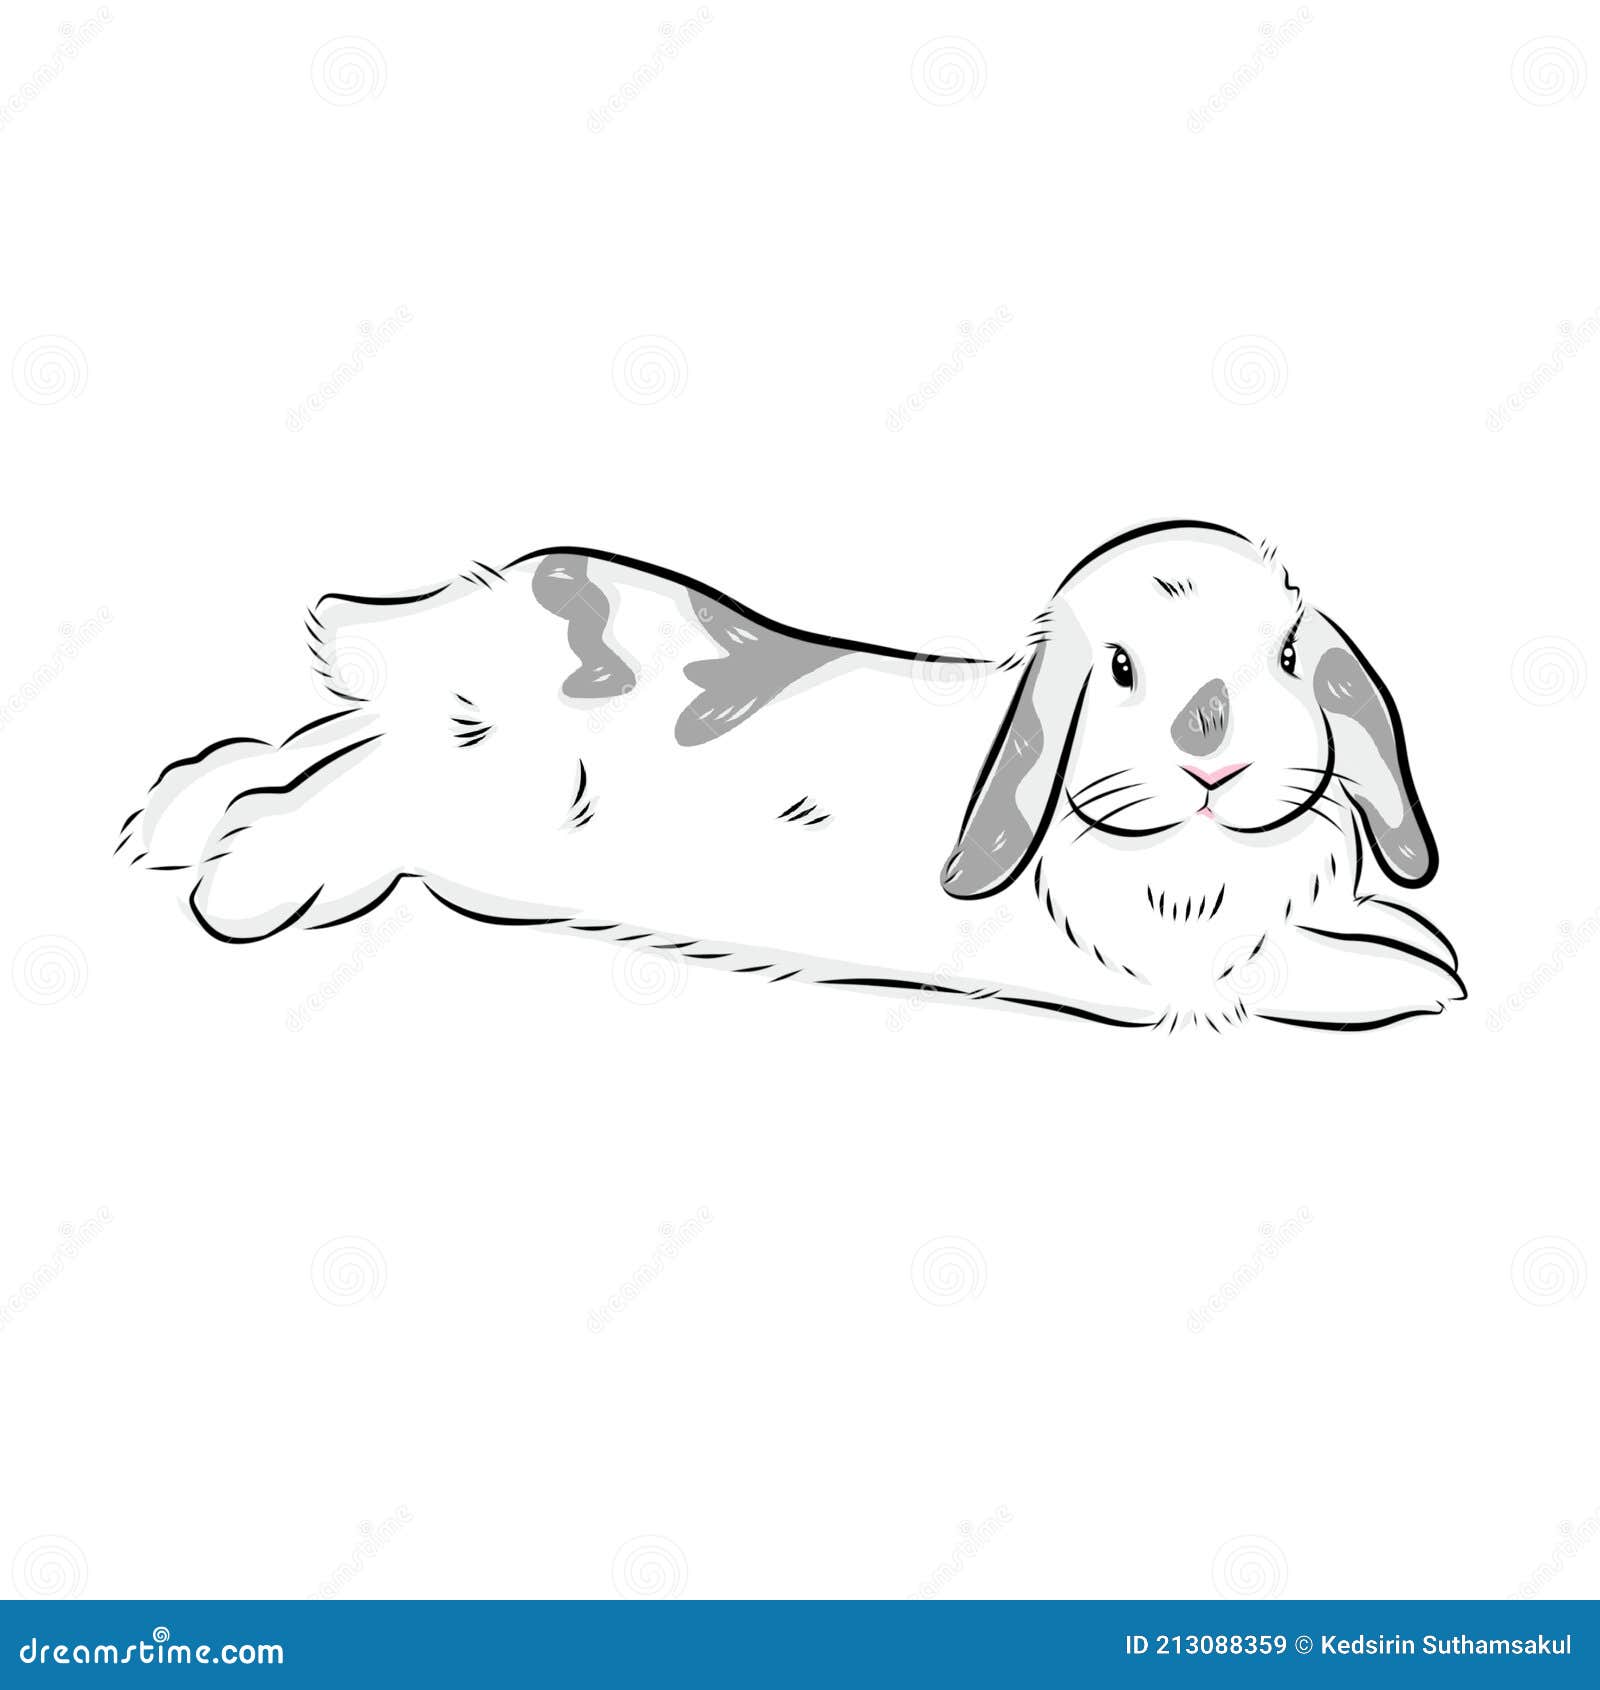 List 104+ Images how to draw a holland lop bunny Full HD, 2k, 4k